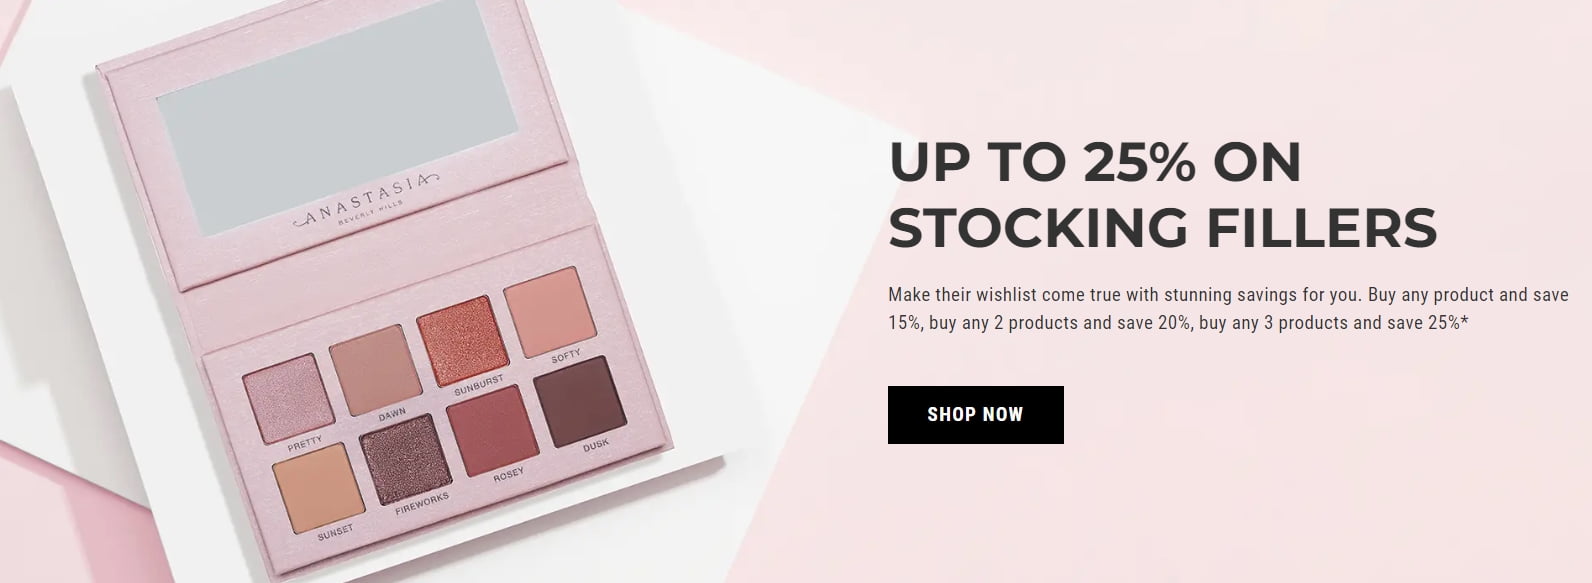 Up to 25% off Stocking Fillers at Anastasia Beverly Hills